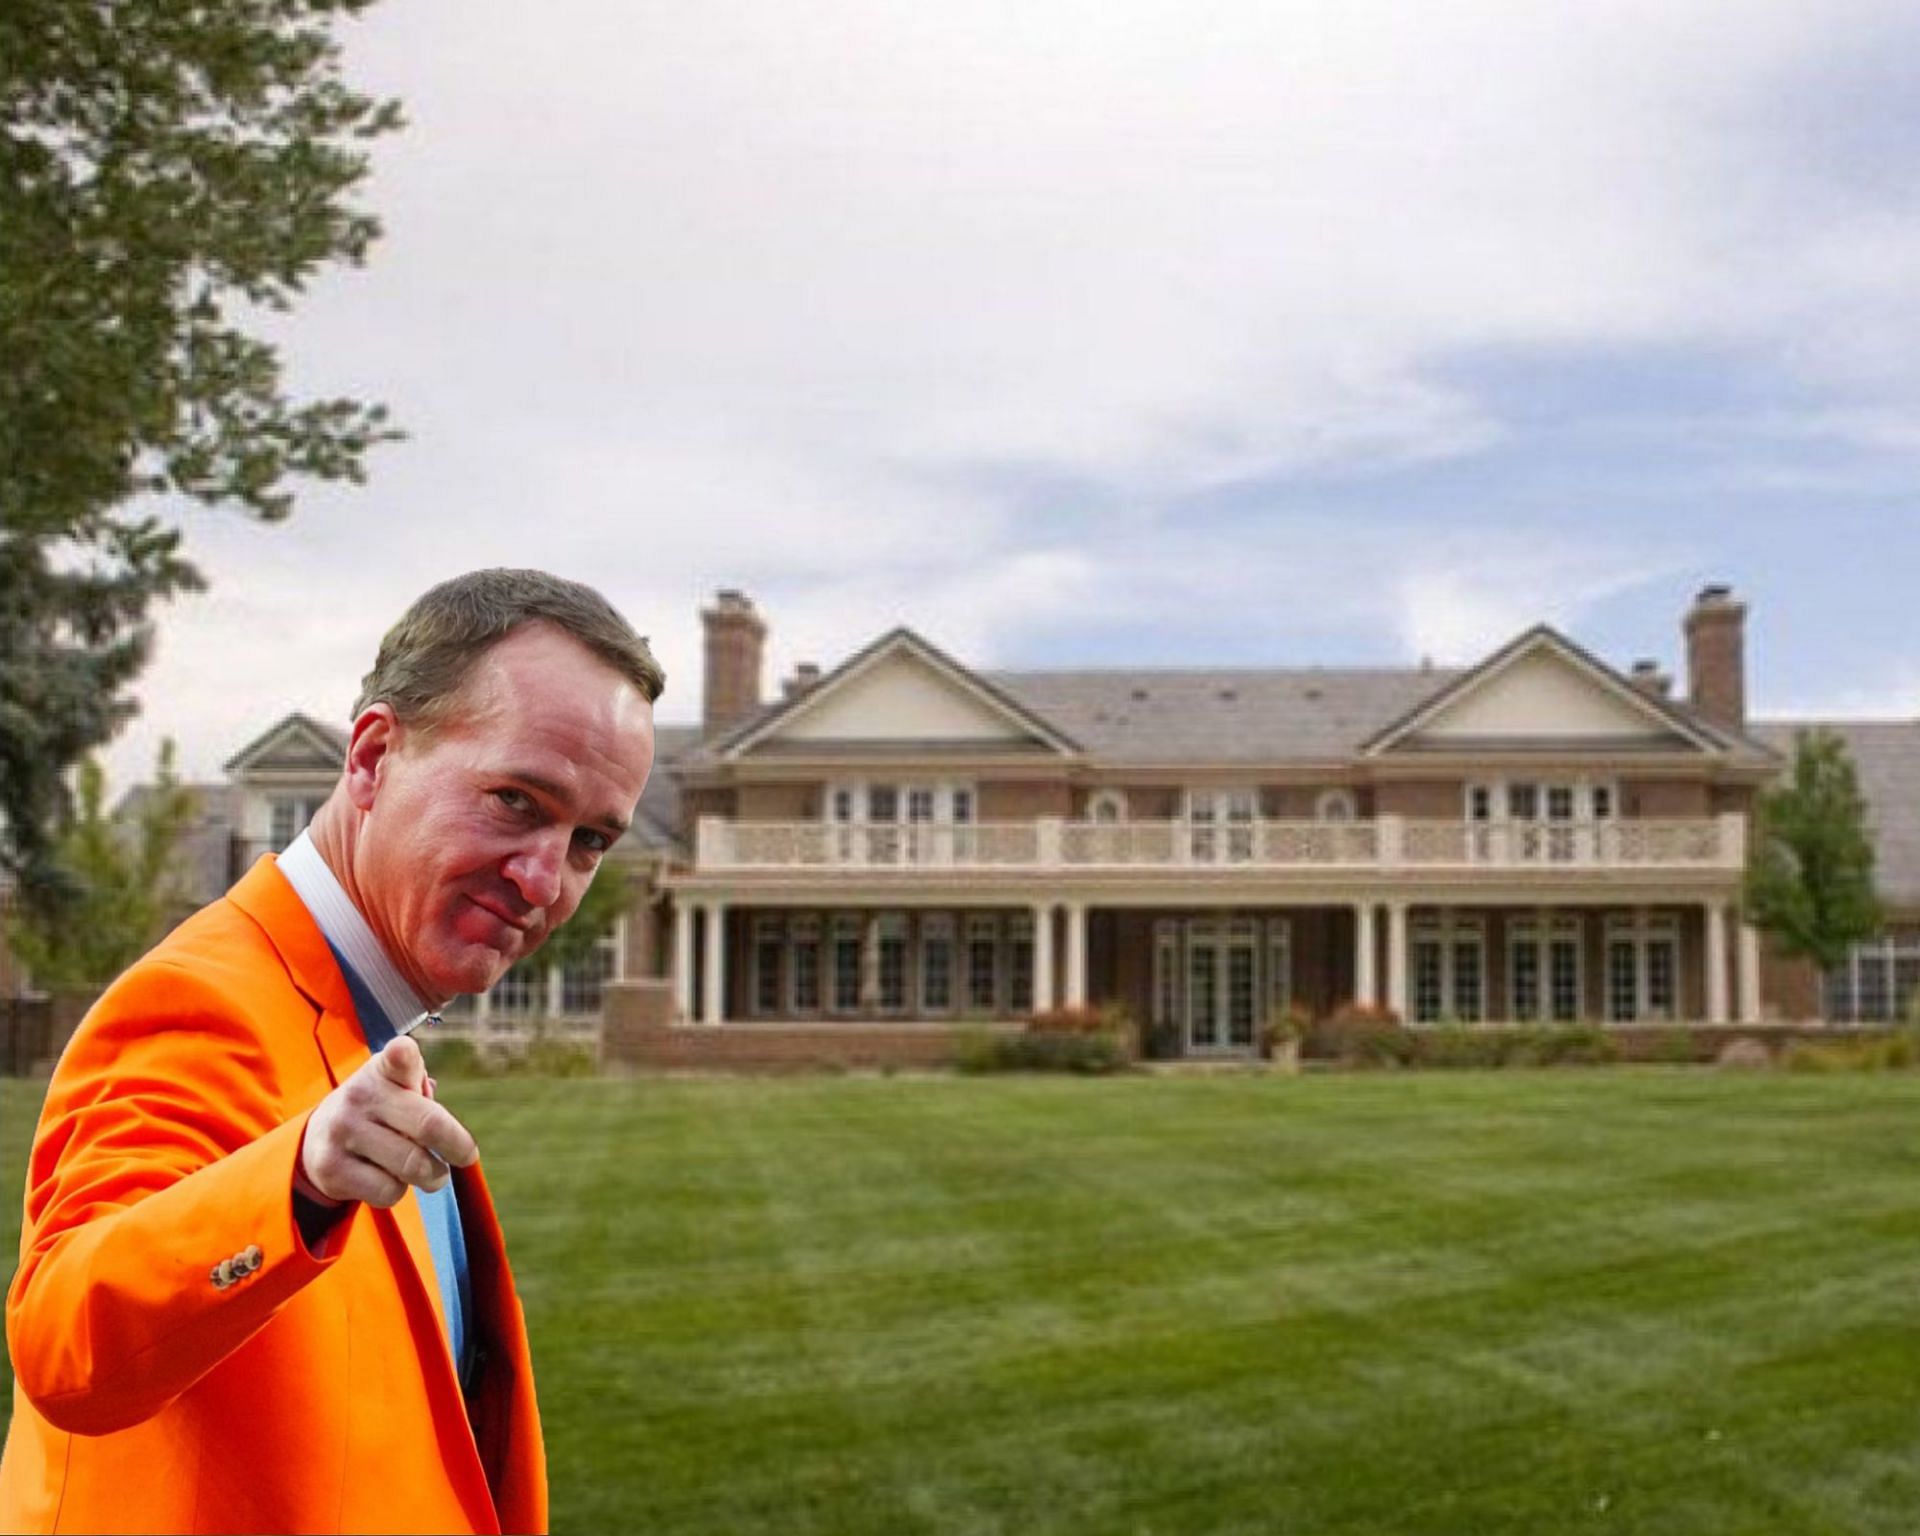 Where does Peyton Manning live?